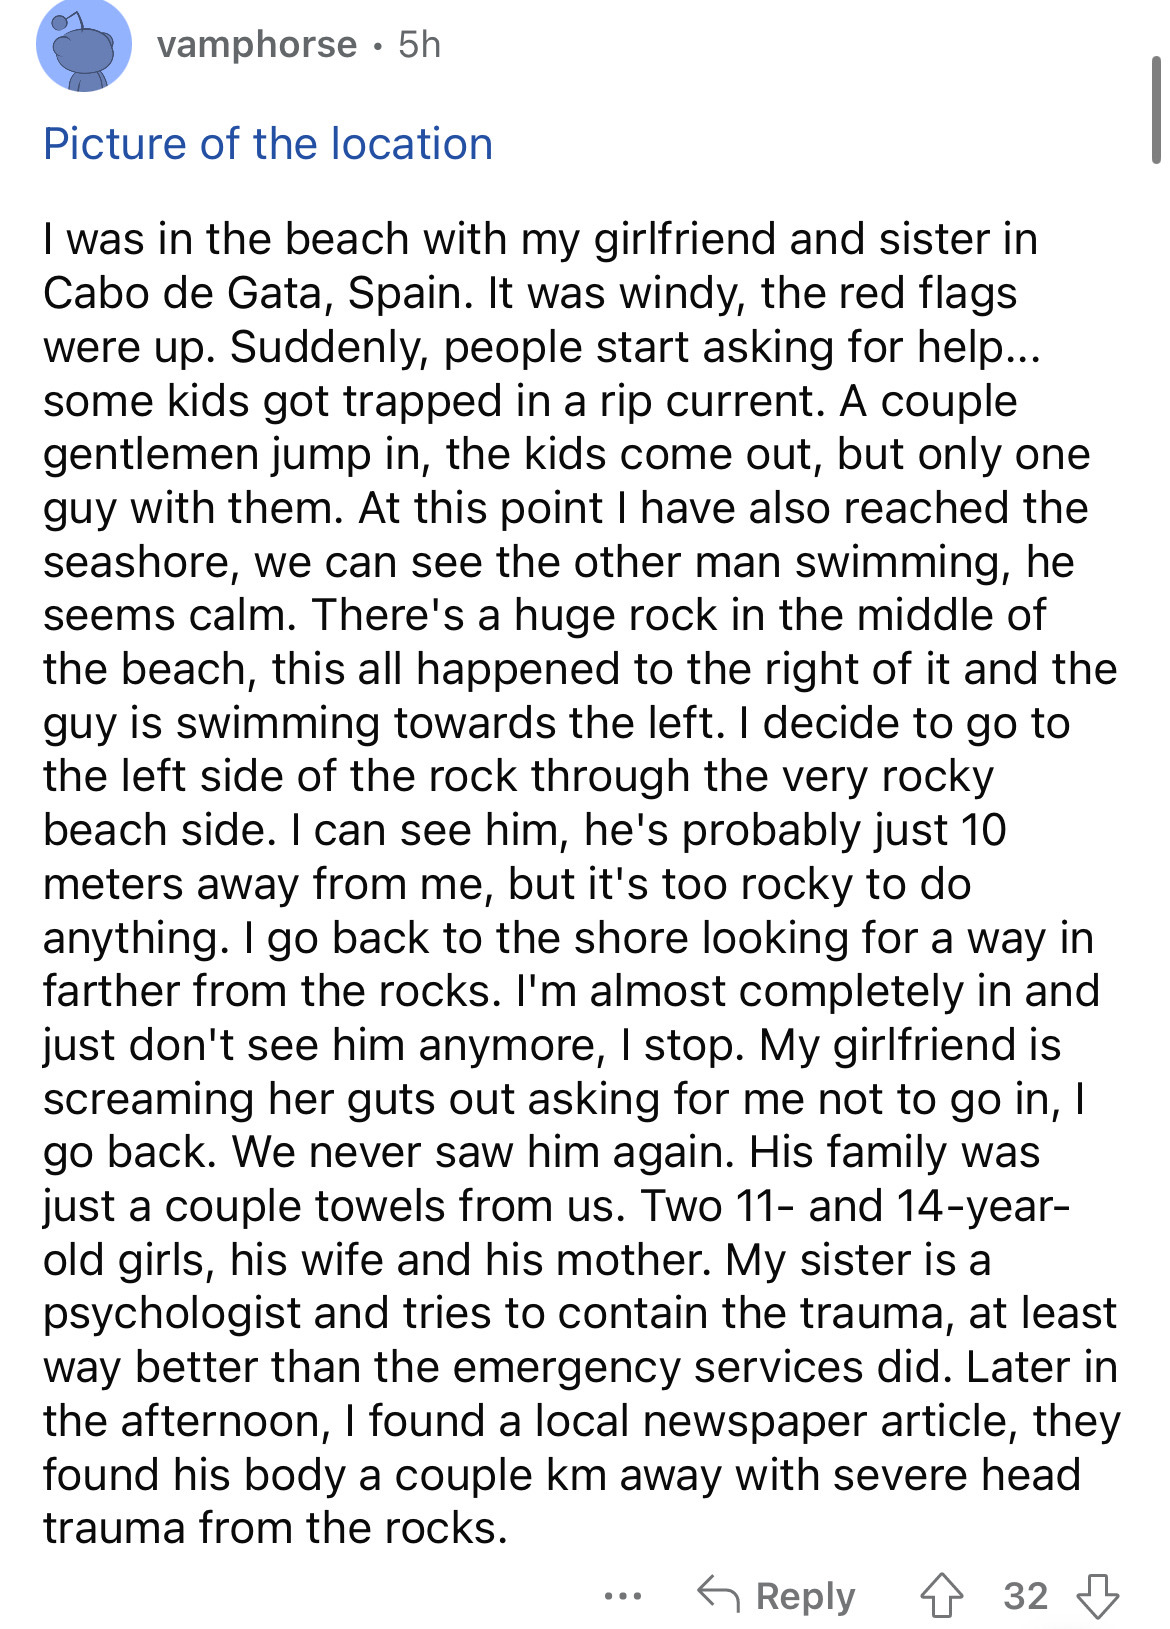 article on cancer - vamphorse . 5h Picture of the location I was in the beach with my girlfriend and sister in Cabo de Gata, Spain. It was windy, the red flags were up. Suddenly, people start asking for help... some kids got trapped in a rip current. A co